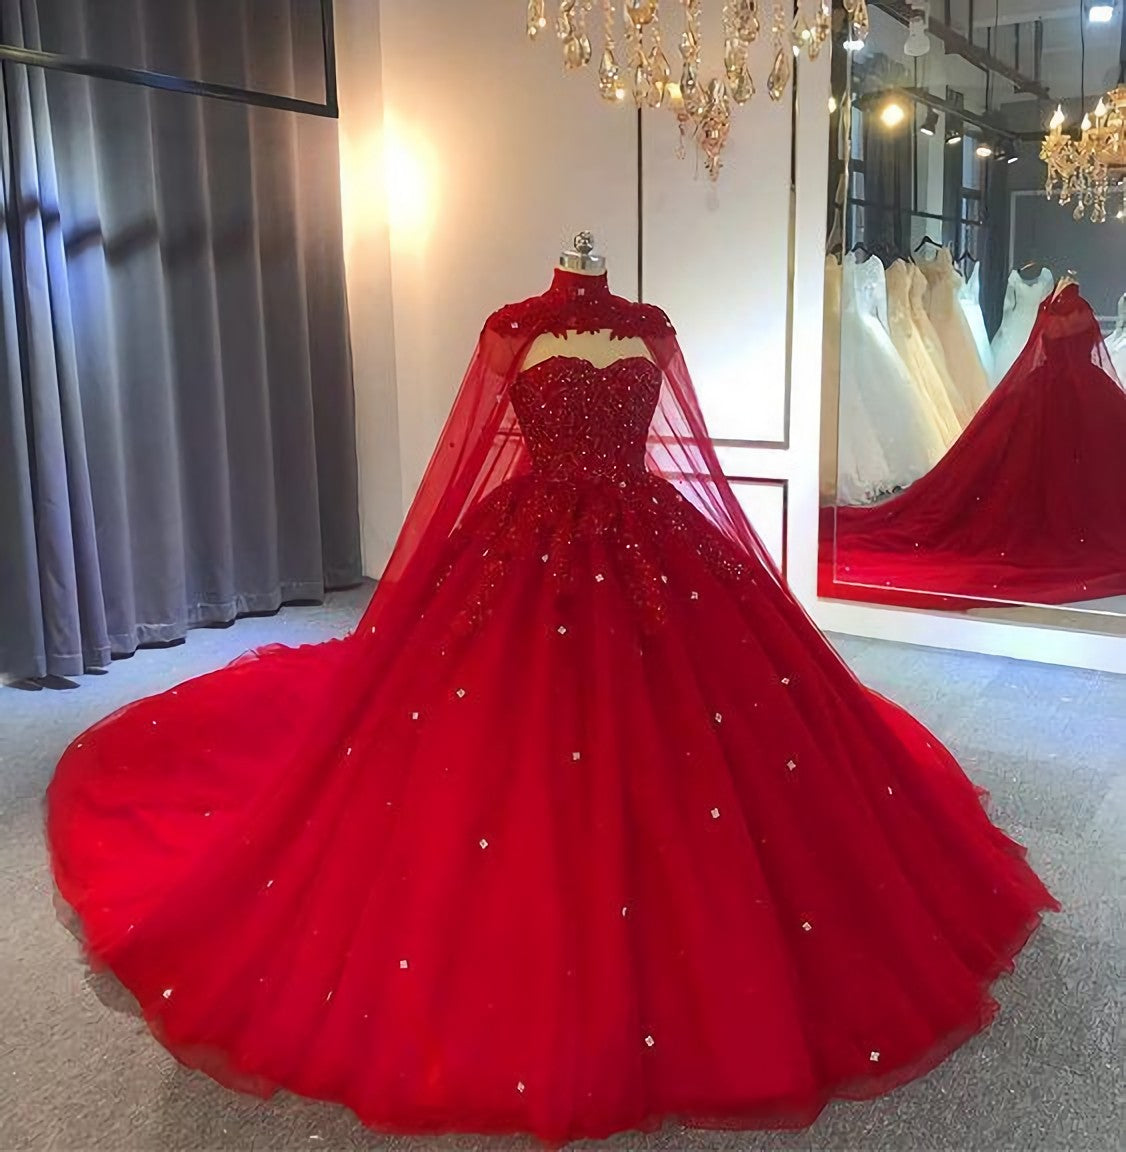 Tulle Ball Gown Wedding Dress, With Cape Prom Dresses, Evening Dresses